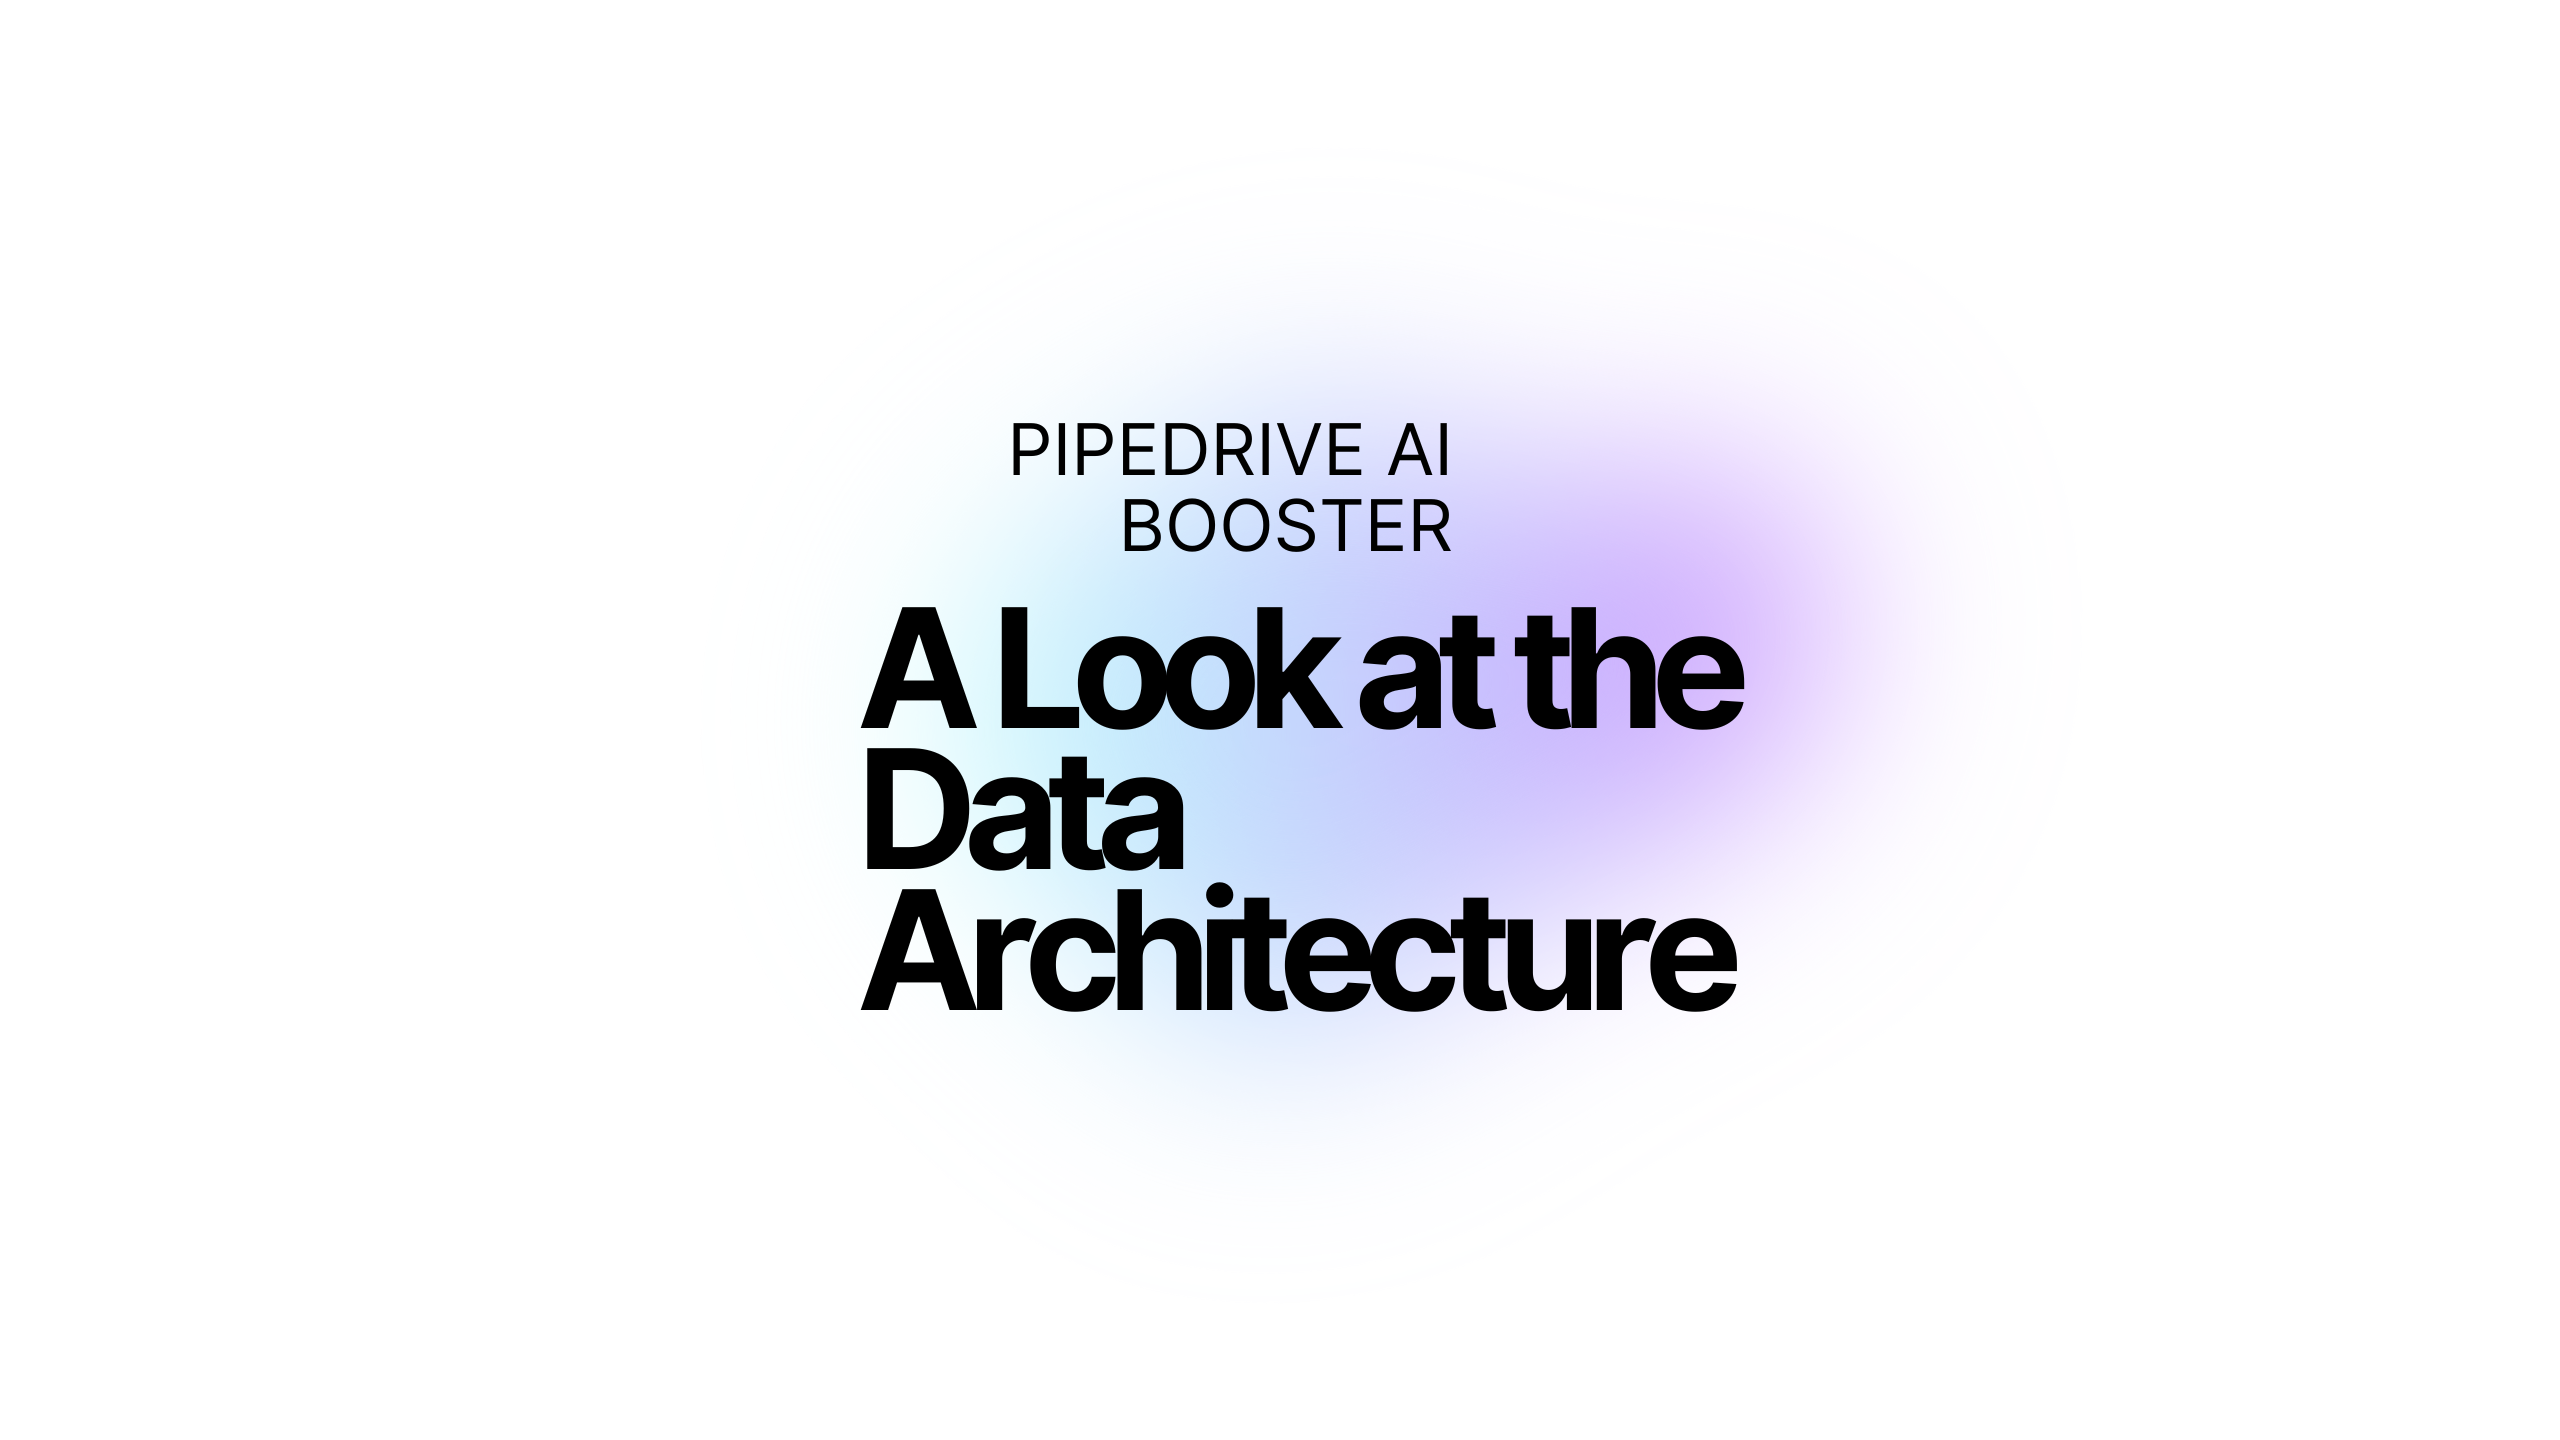 Pipedrive AI/ML: A Look at the Data Architecture